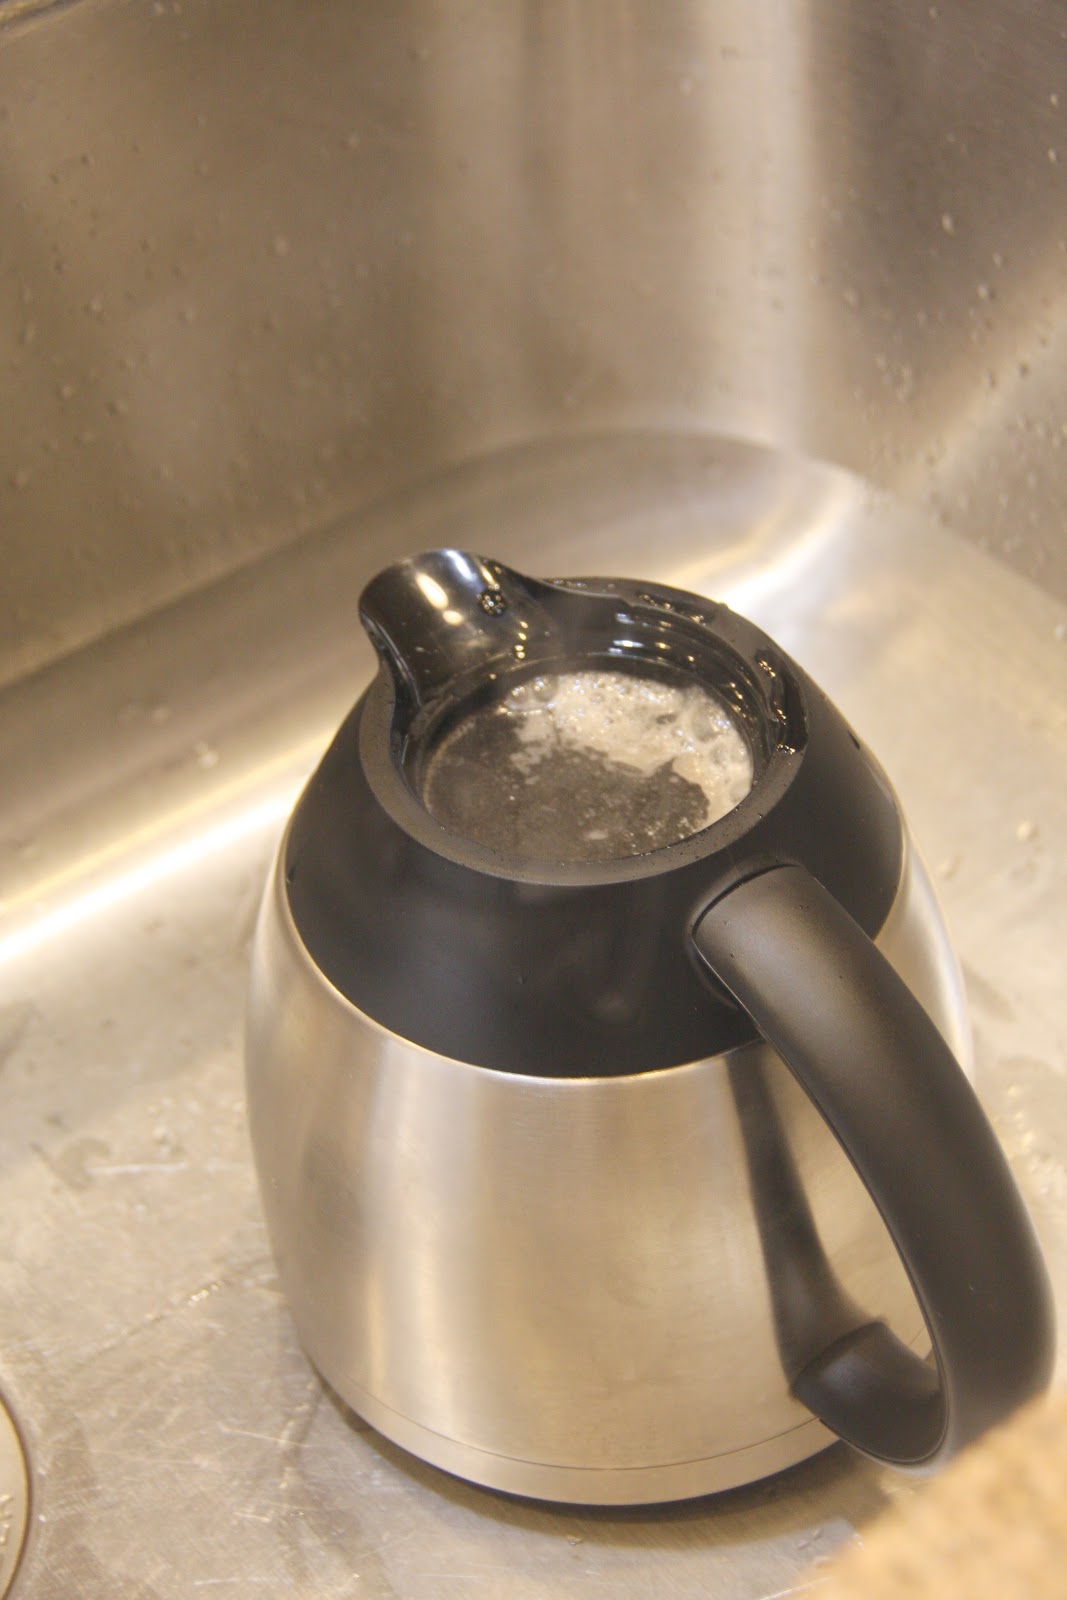 Google said it was okay to heat milk in my kettle, but now it looks like  this. How can I clean it? : r/CleaningTips